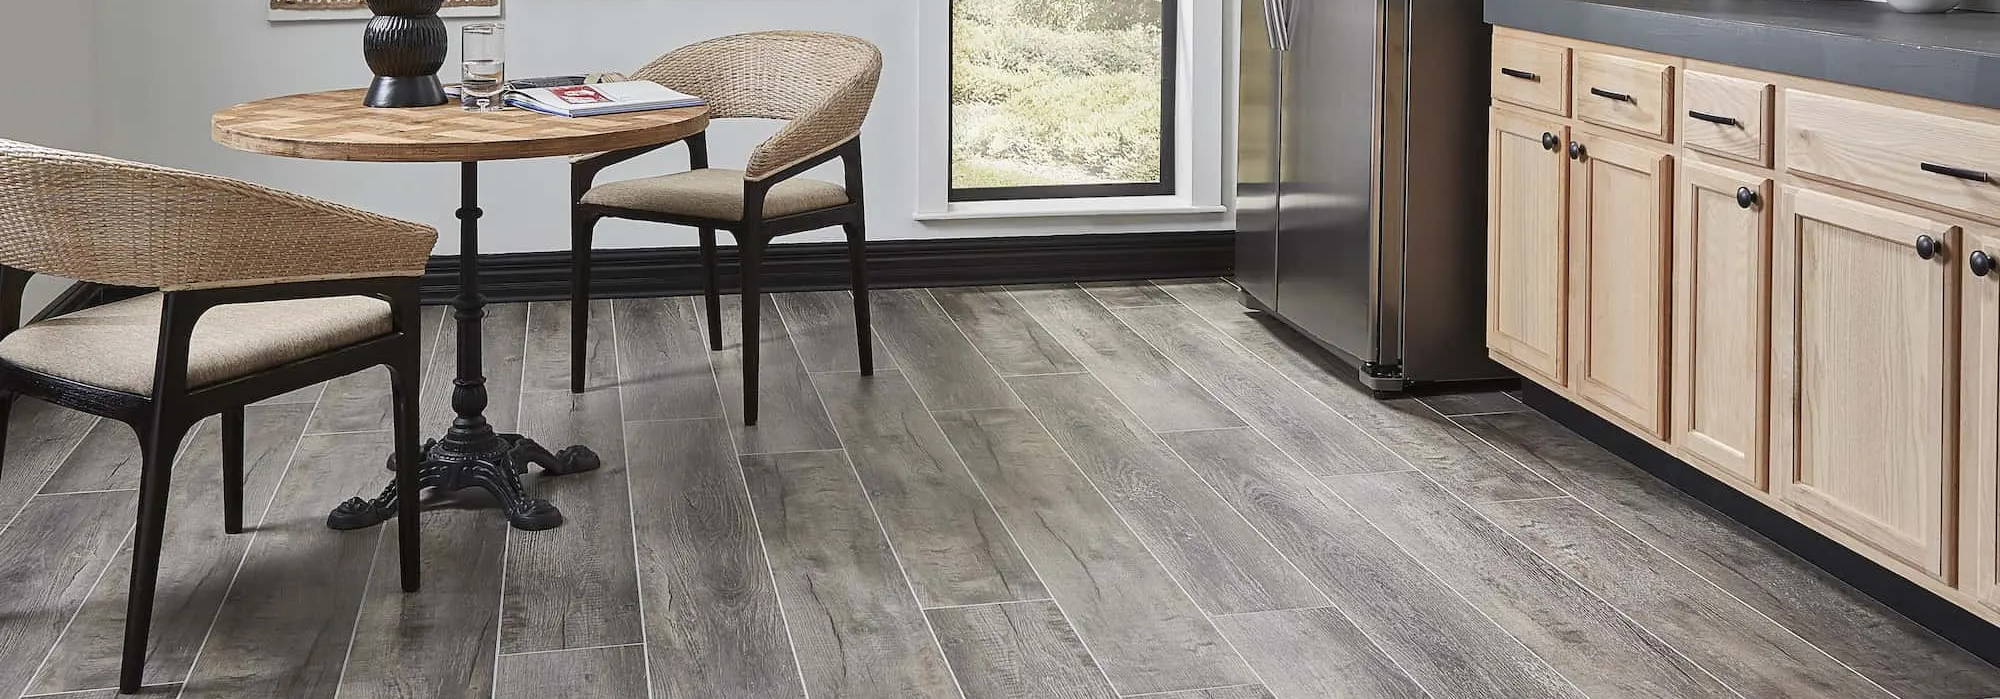 Kaouds Vinyl Flooring is perfect for kitchens, living rooms, bathrooms and more!